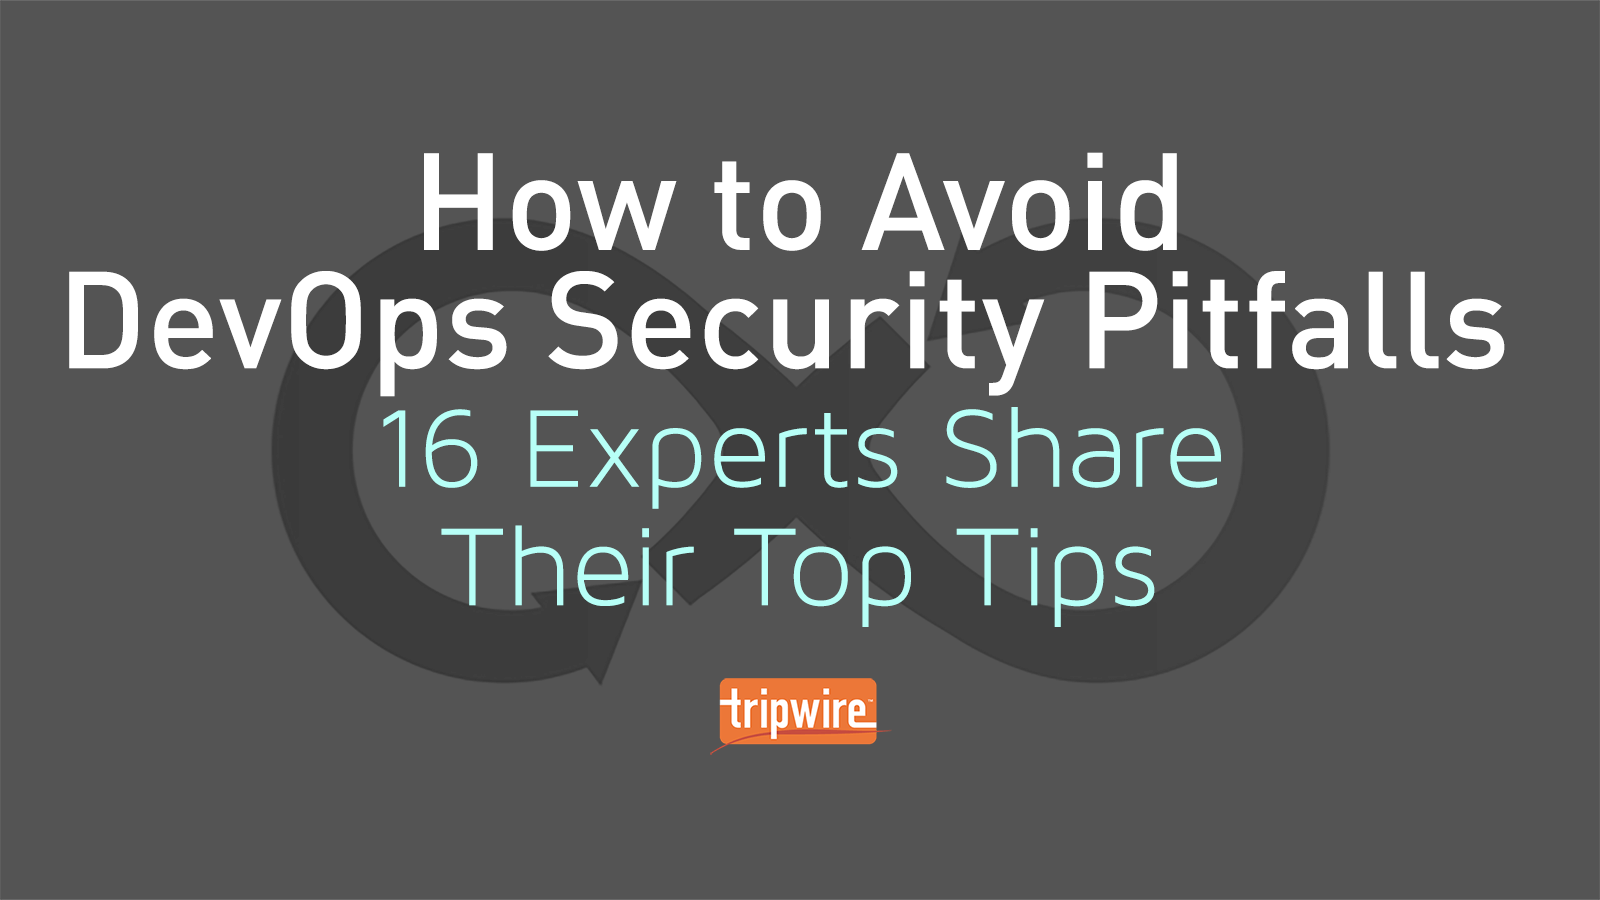 How to Avoid DevOps Security Pitfalls: 16 Experts Share Their Top Tips